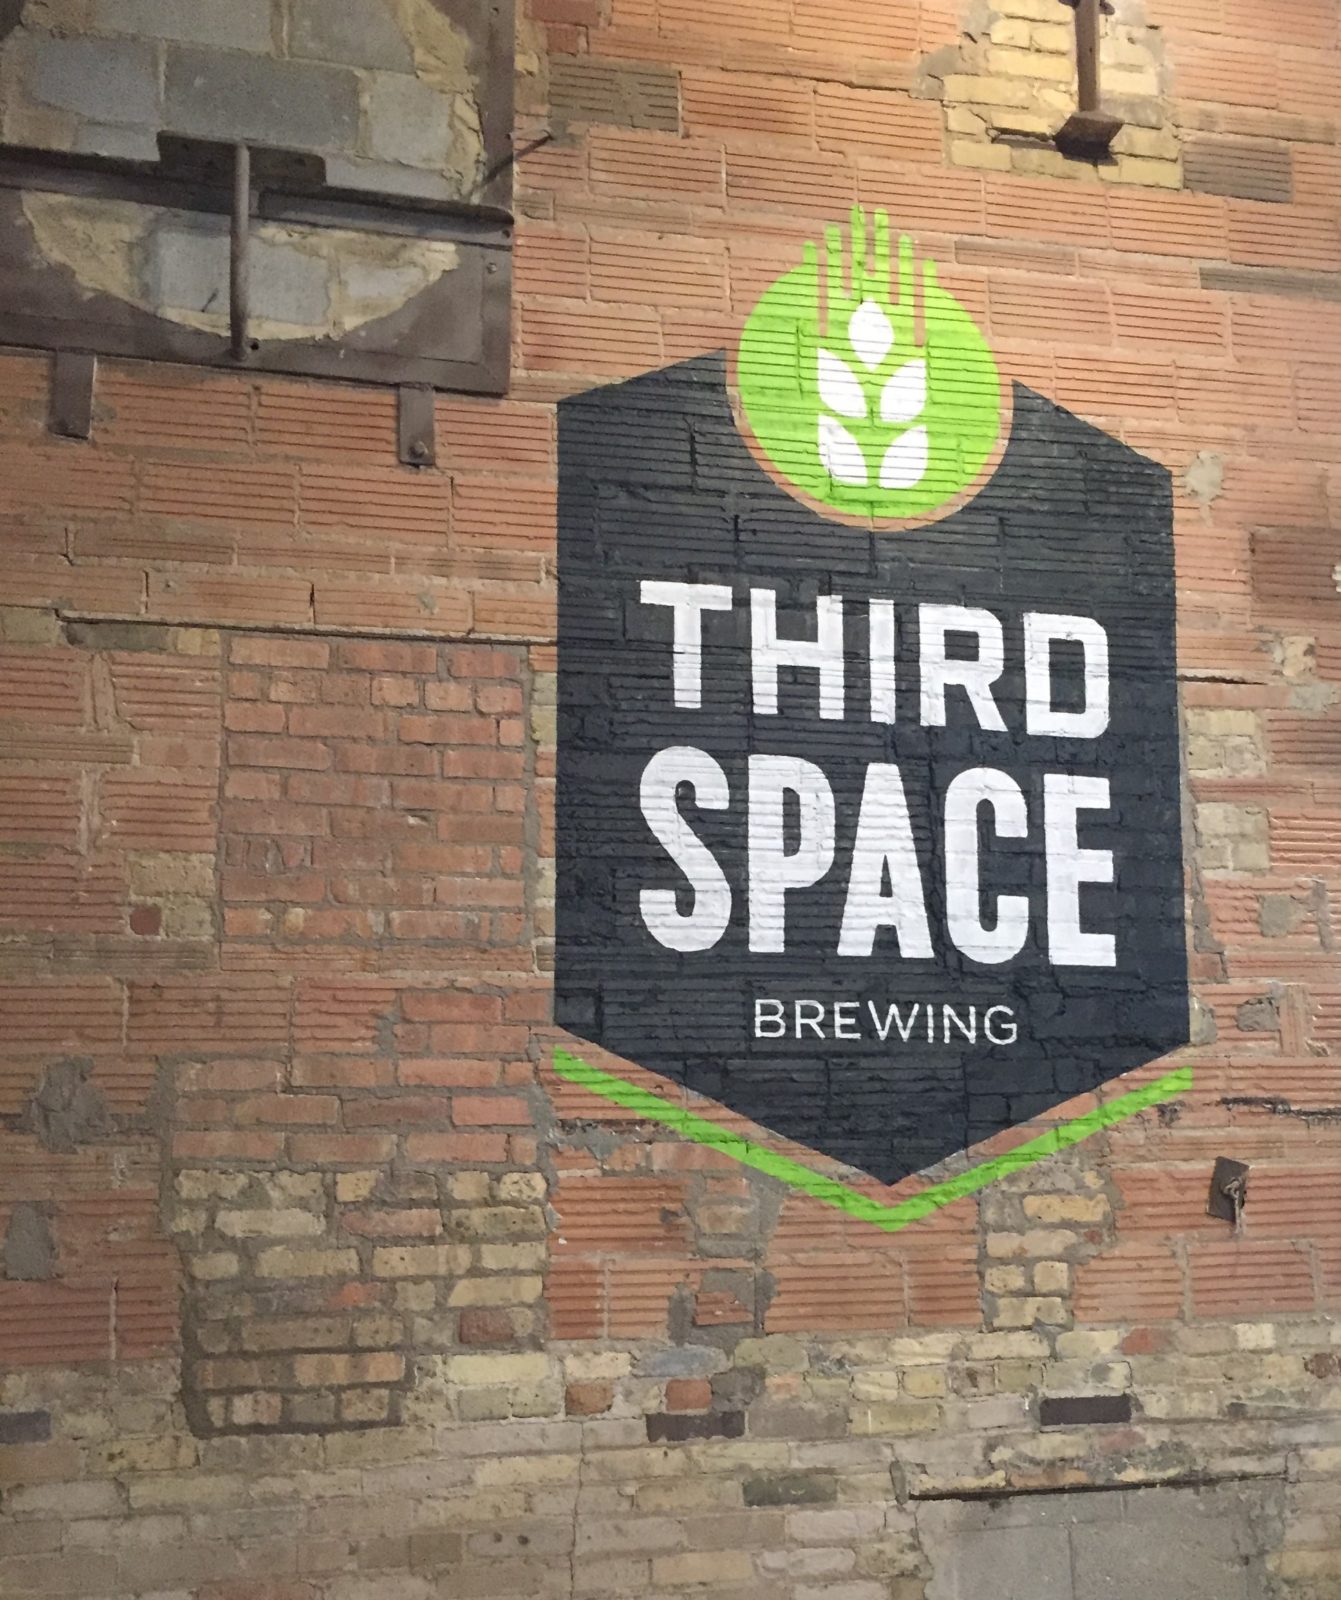 Wisconsin IPA Fest Returns to Third Space Brewing August 20th